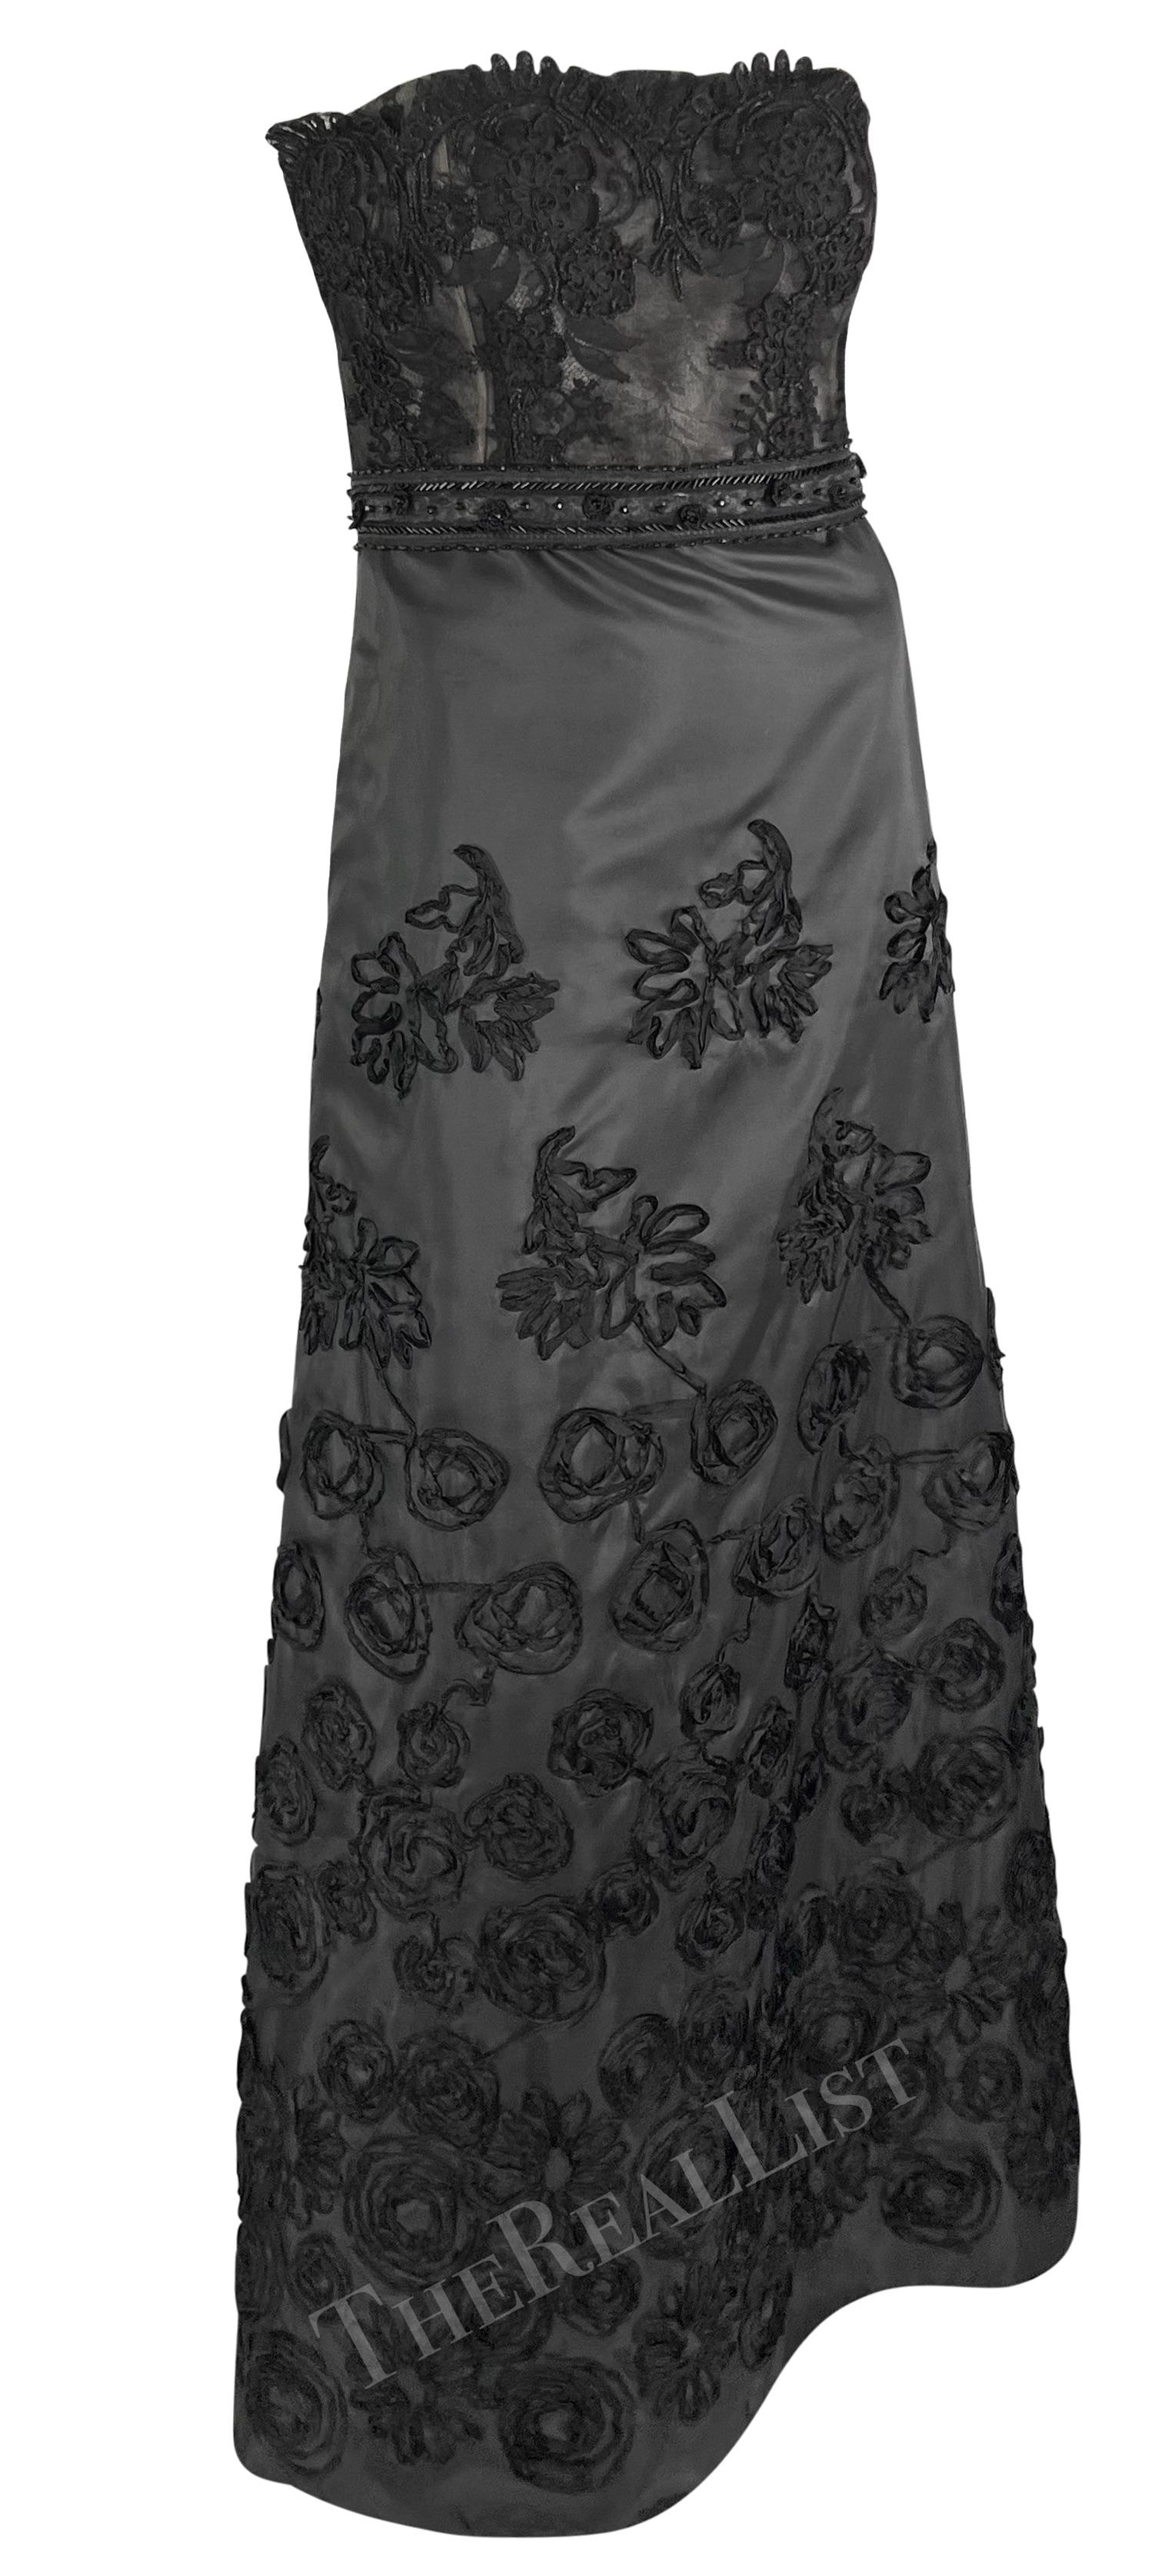 S/S 1999 Christian Lacroix Beaded Lace Overlay Strapless Taffeta Evening Gown For Sale 3